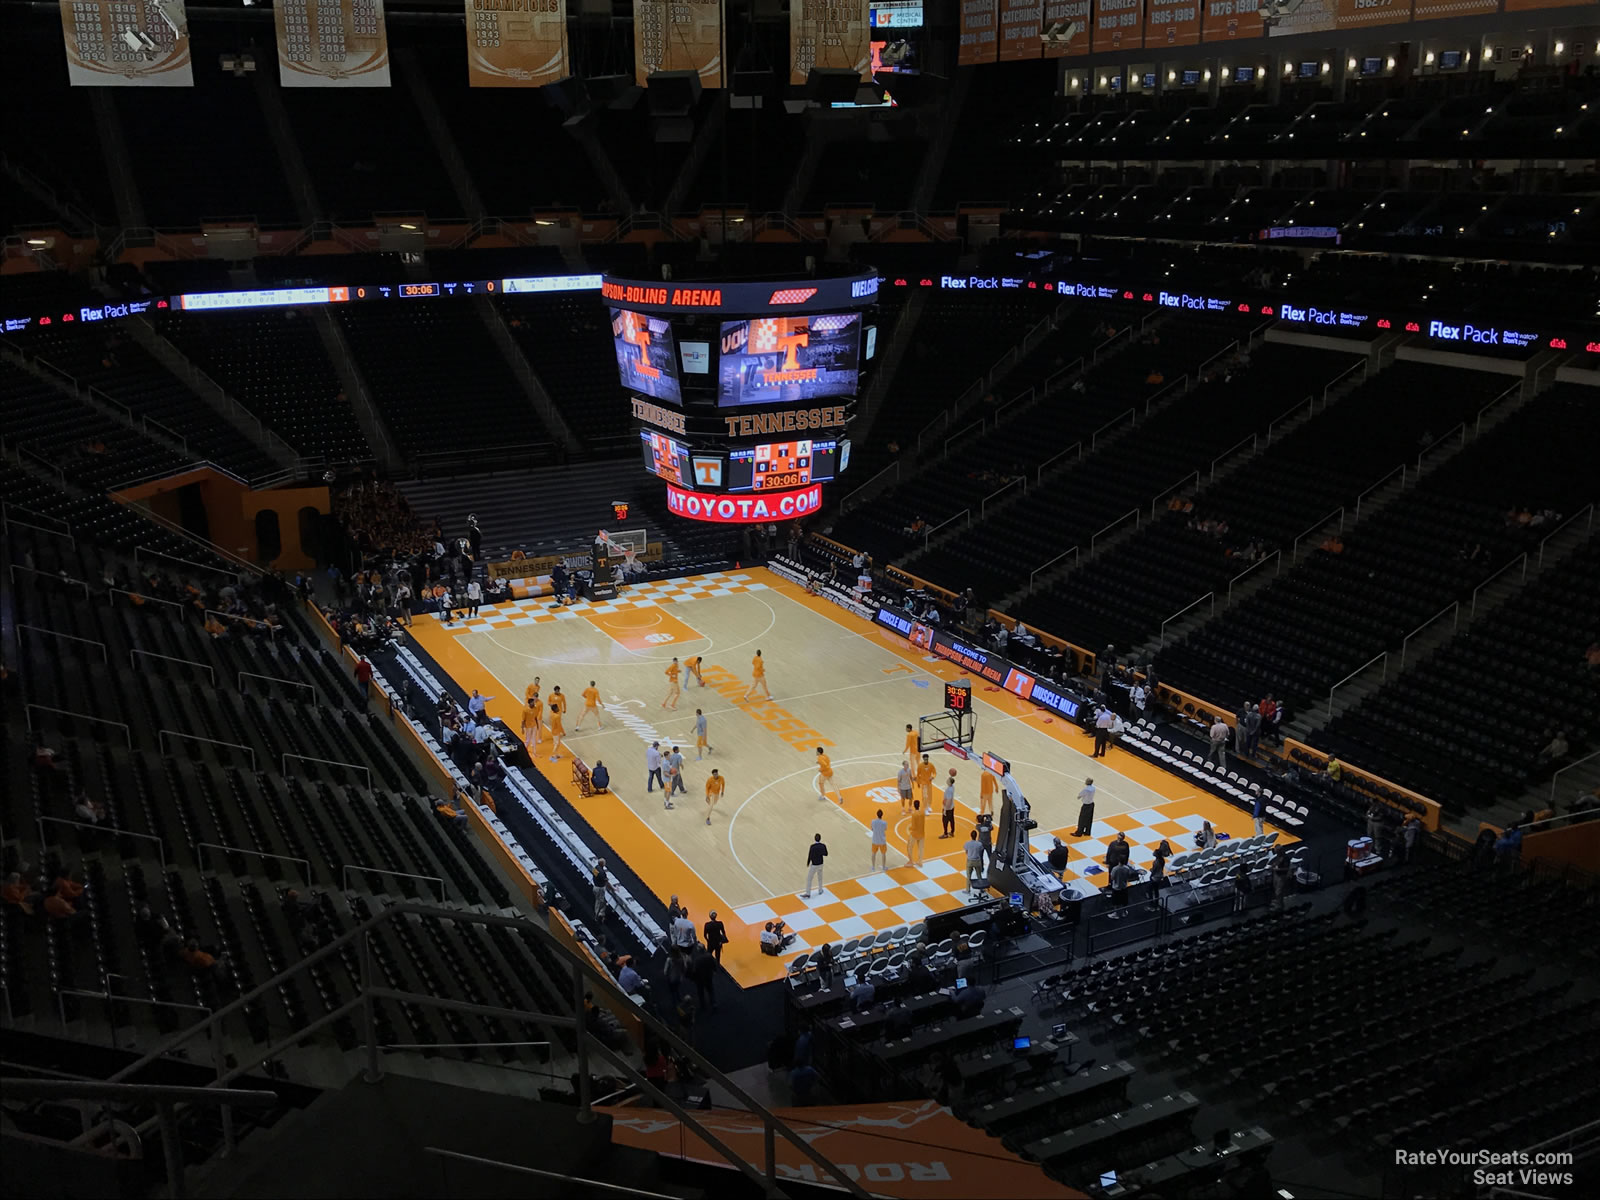 section 315, row 7 seat view  - thompson-boling arena